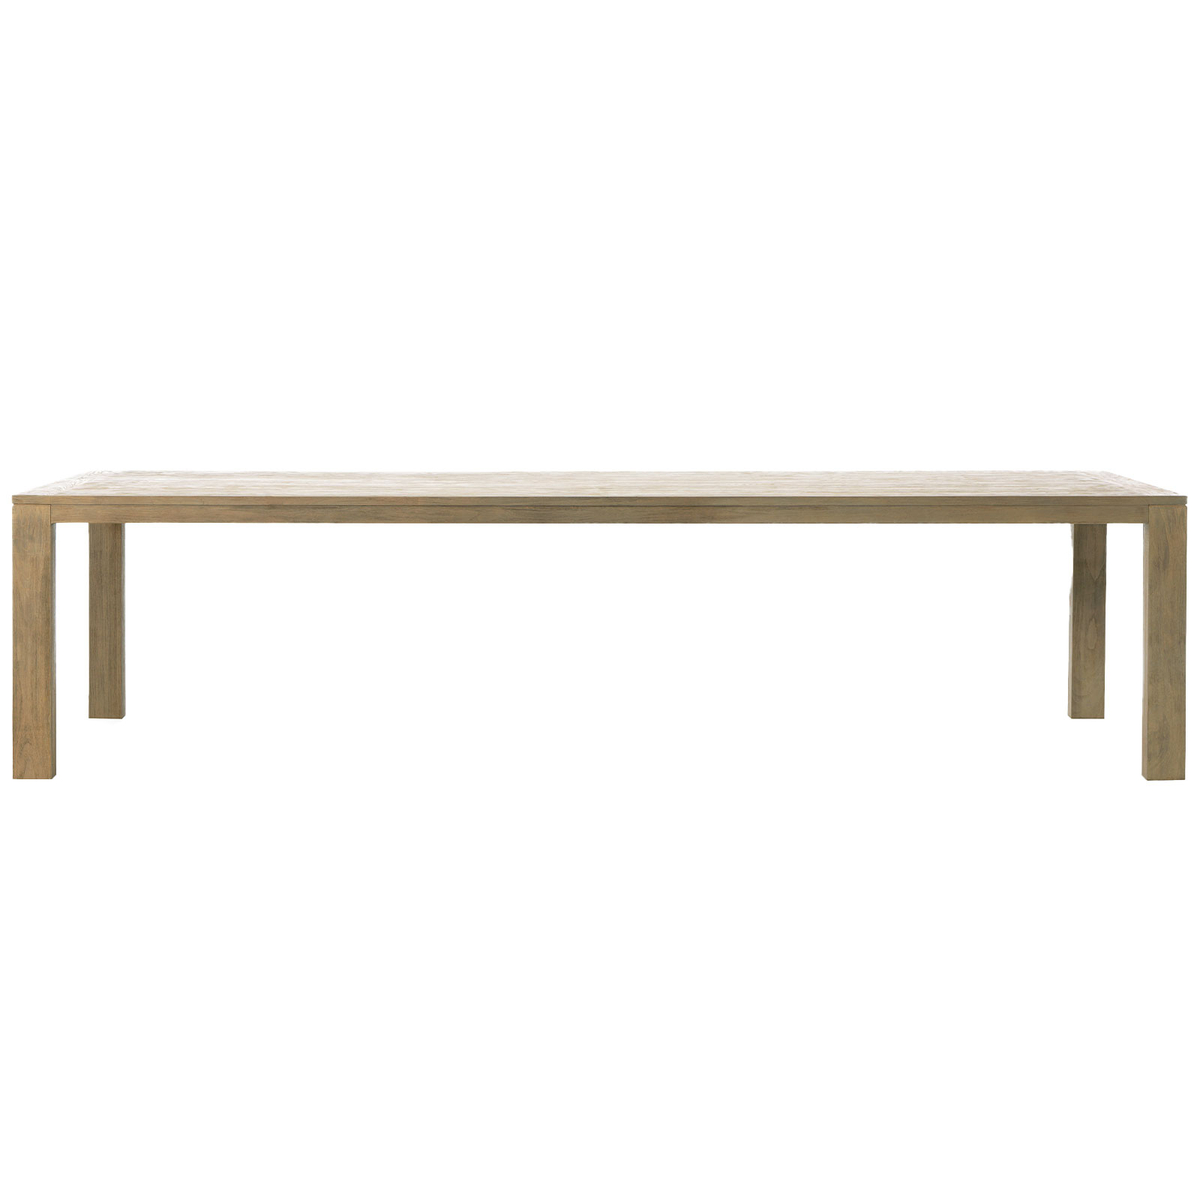 Costes XL Outdoor Dining Table